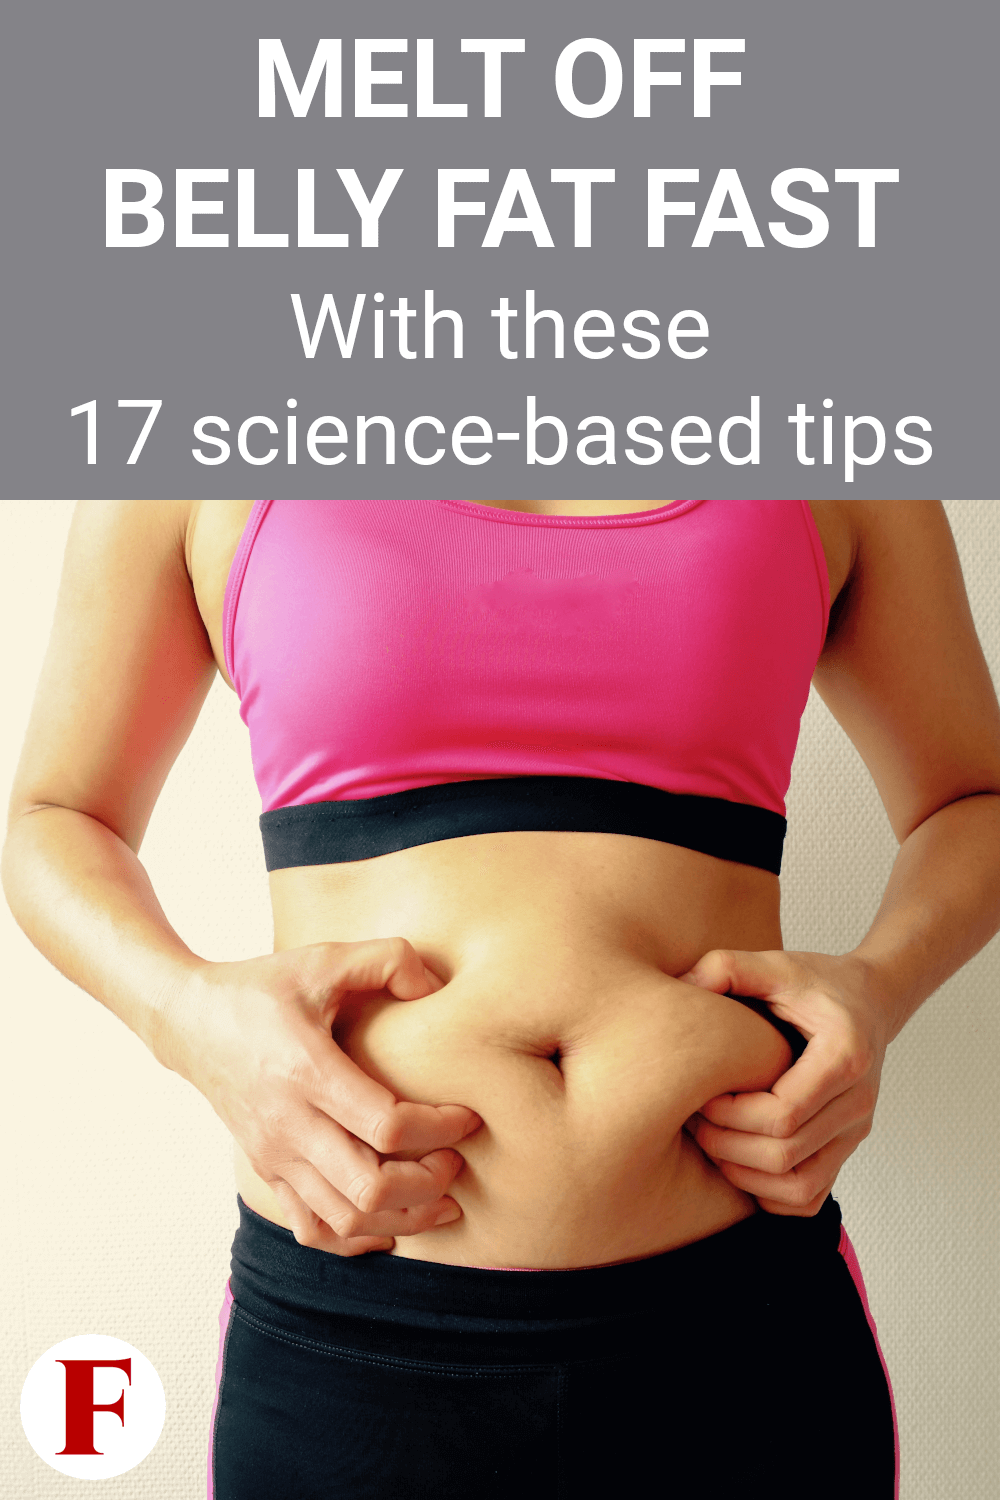 3 Steps To Lose Belly Fat Fast, Based On Science